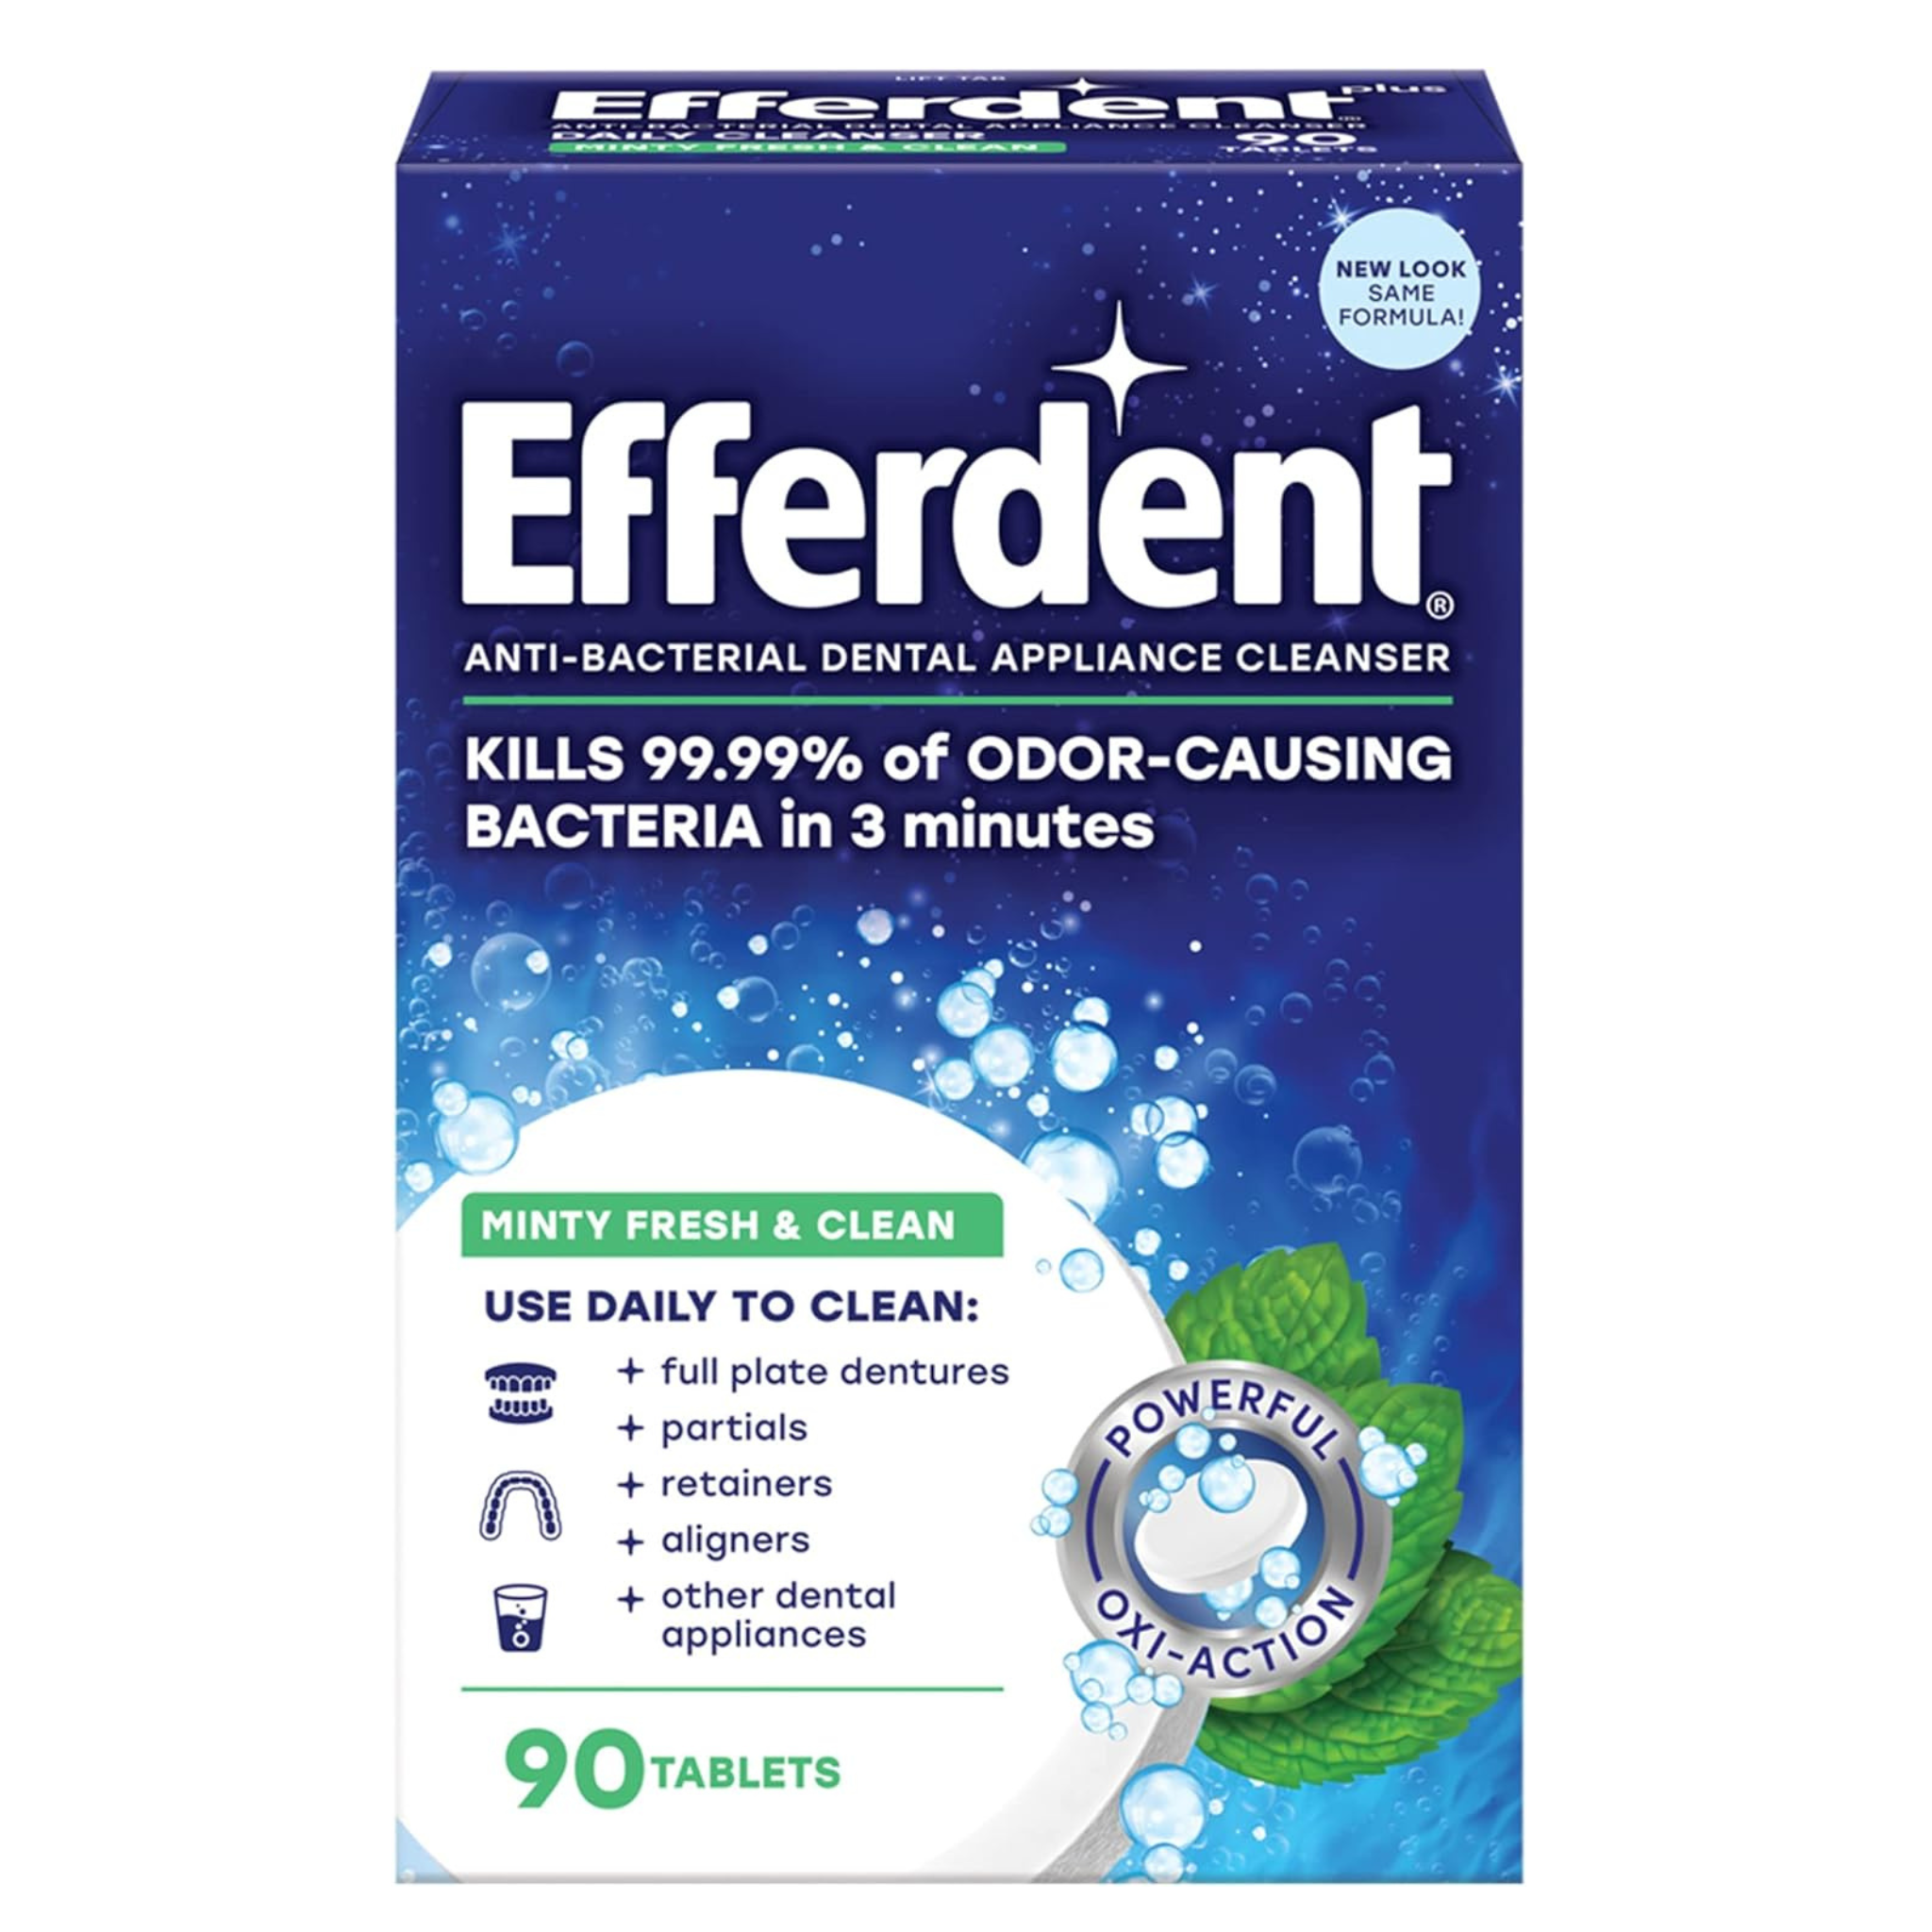 90-Ct Efferdent Anti-Bacterial Dental Appliance Cleaning Tablets